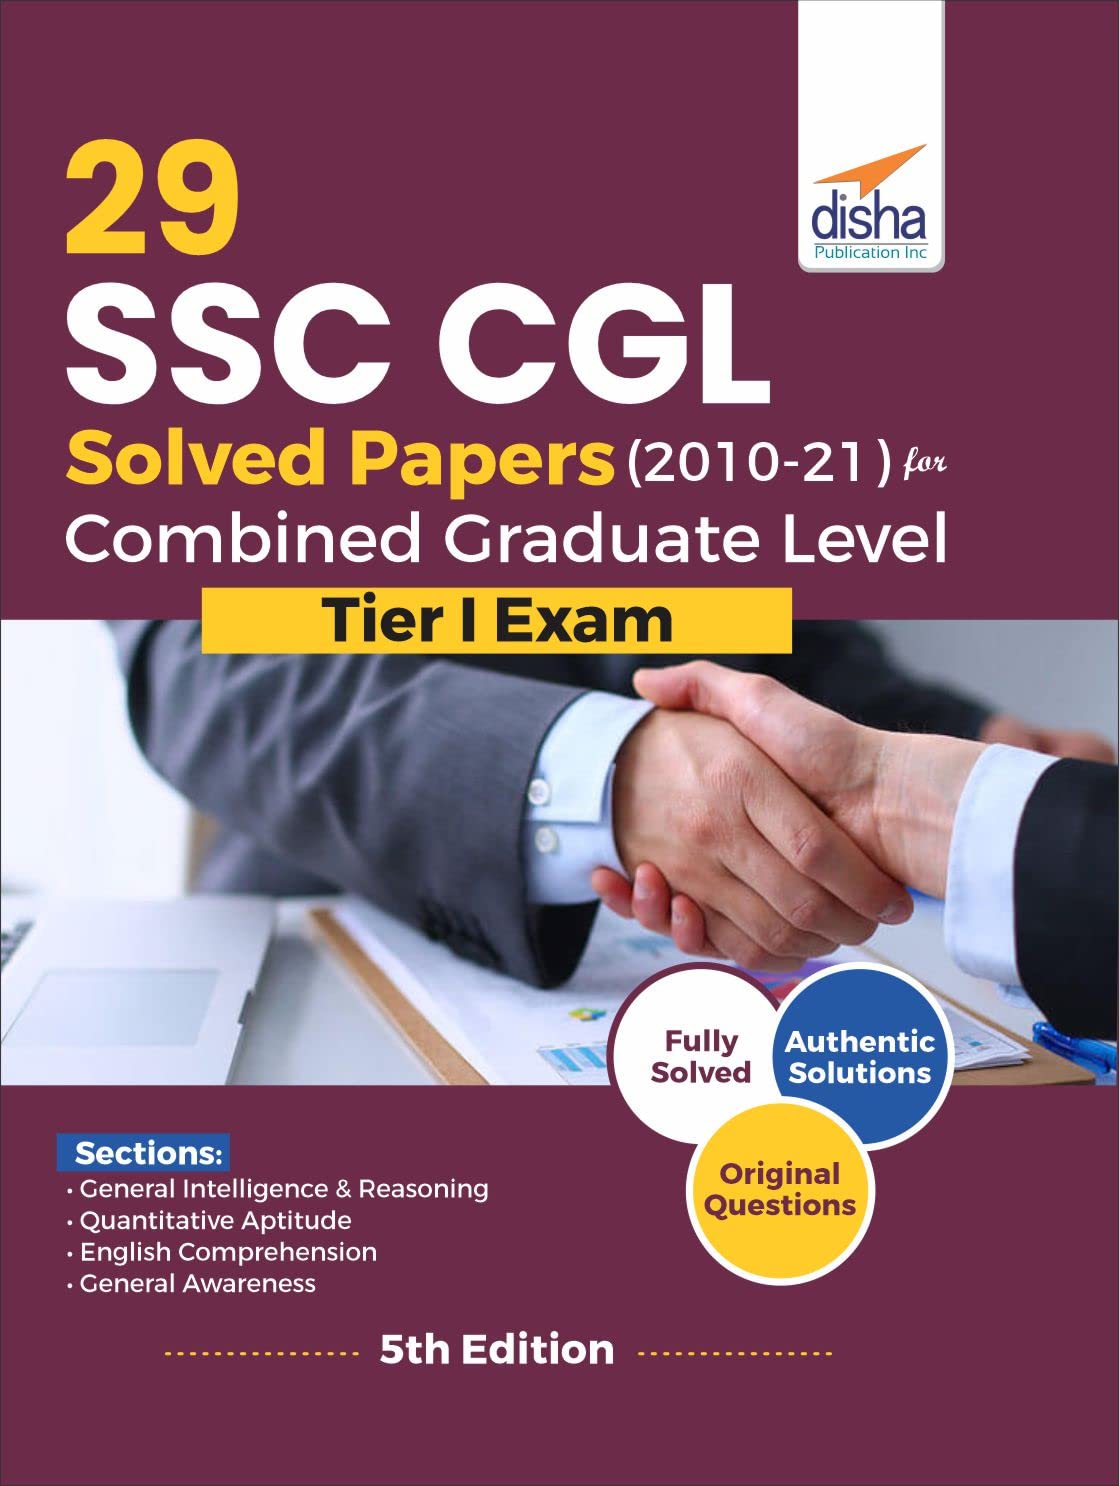 29 SSC CGL Solved Papers (2010 - 21) for Combined Graduate Level Tier I Exam